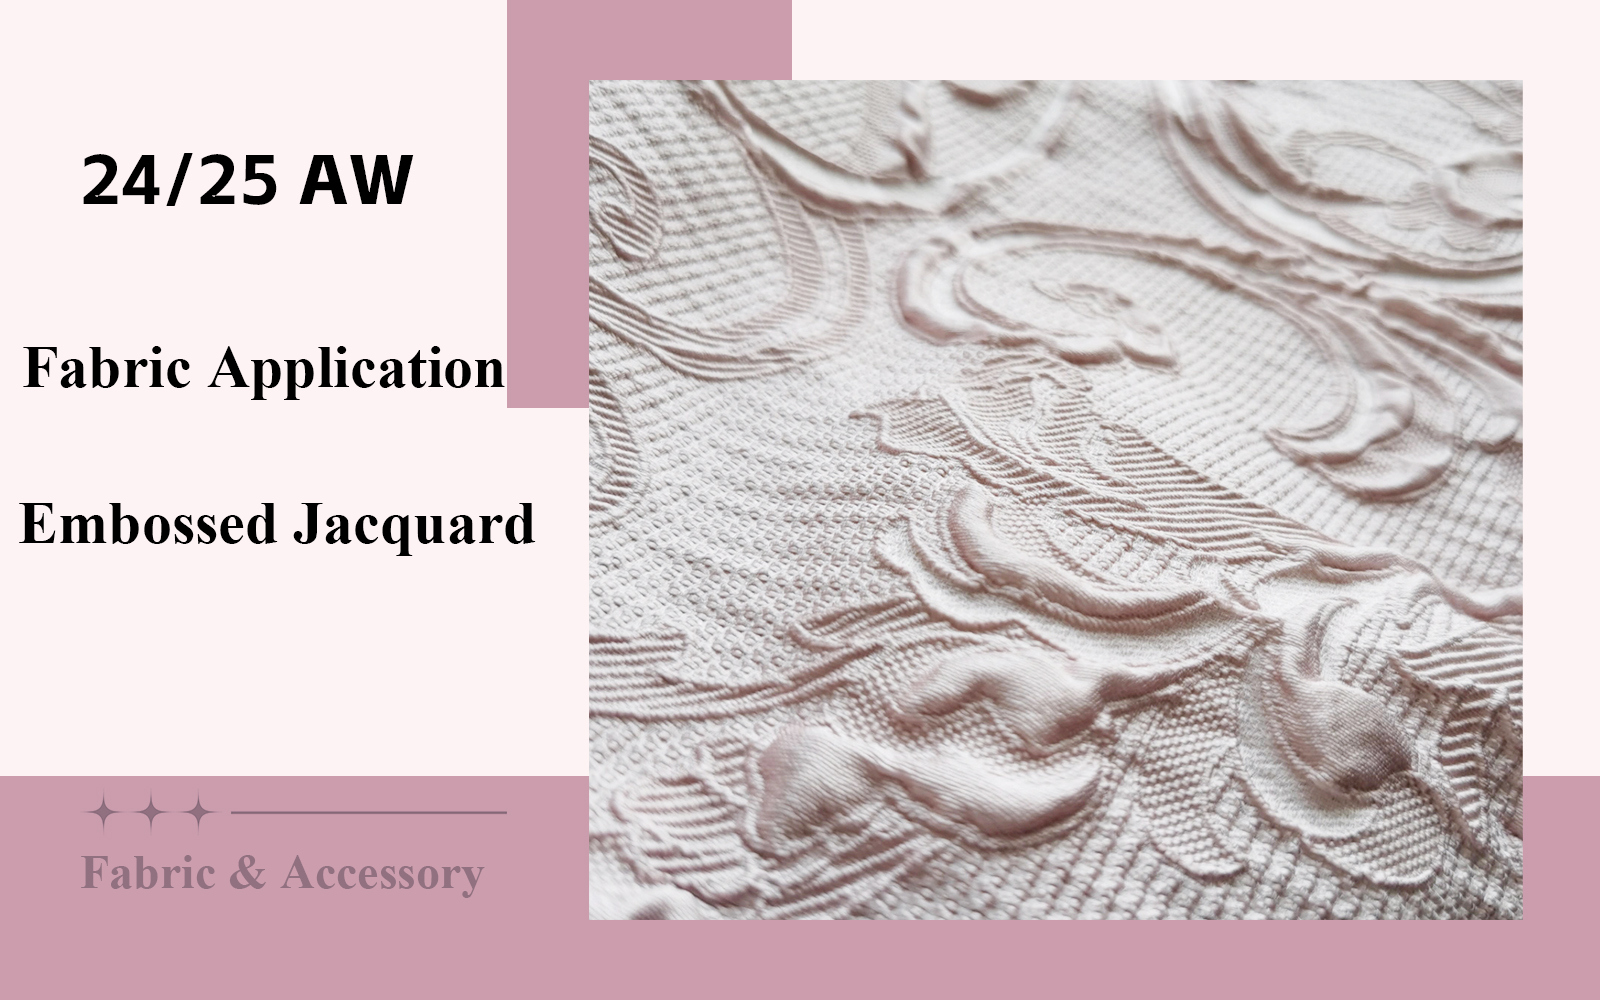 The Fabric Trend for Women's Embossed Jacquard